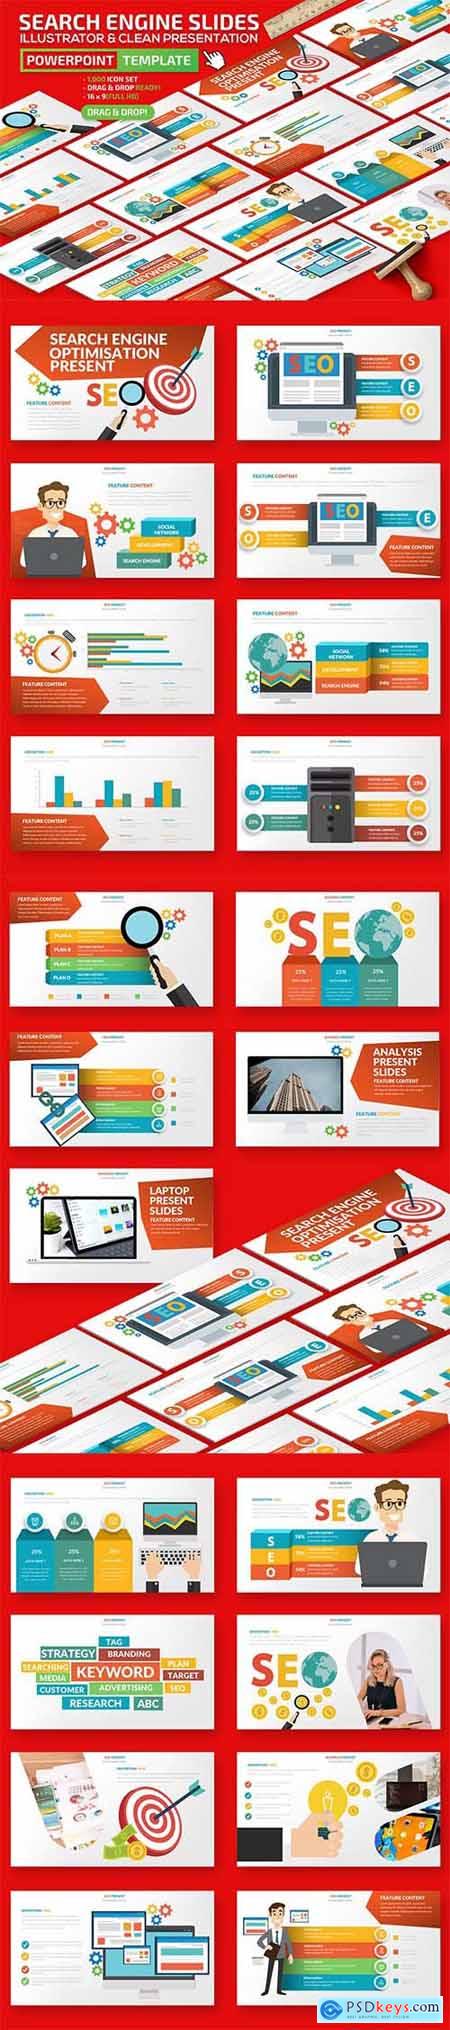 Search Engine Powerpoint Presentation Template